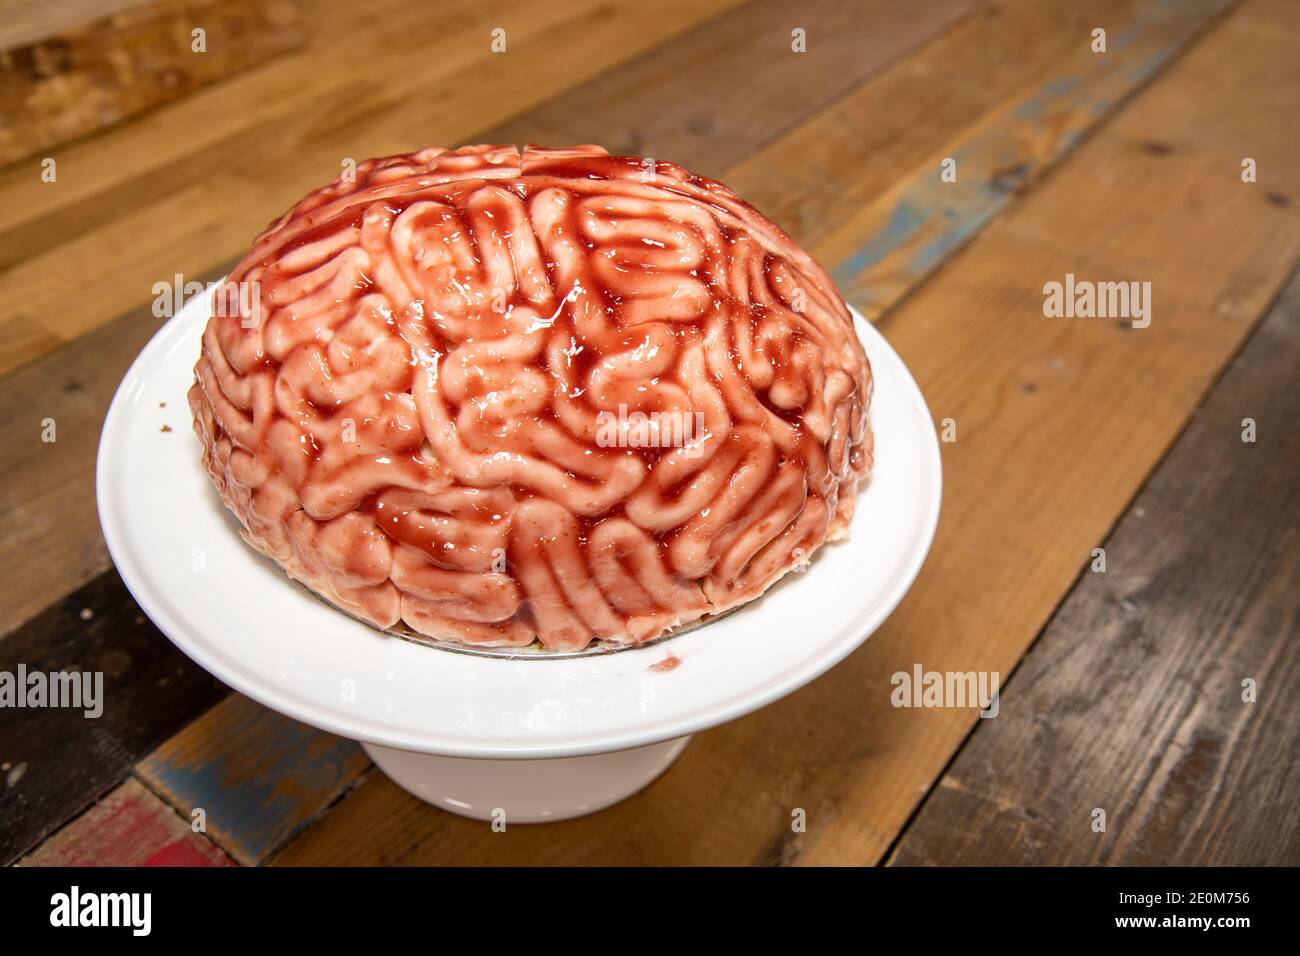 A cake in the shape of a brain with strawberry source brushed on it to make the sponge cake look like a real human bloody brain for the halloween part Stock Photo